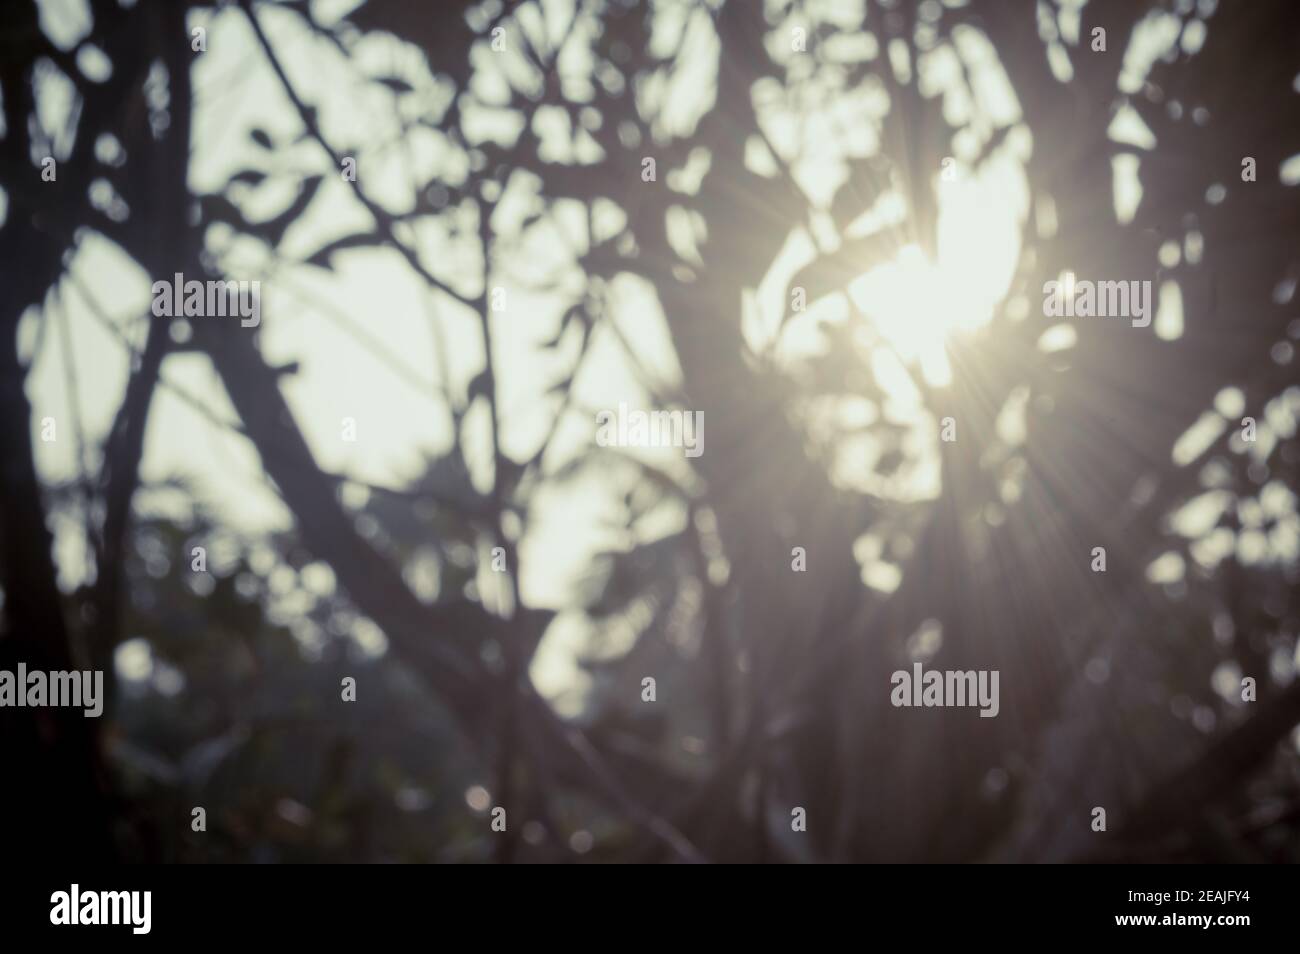 Morning Sunlight through tree leaves. Blur Forest Bush woodland environment in the foreground silhouette by back lit bright sunbeam. Beauty in nature Abstract Theme background image. Copy space. Stock Photo